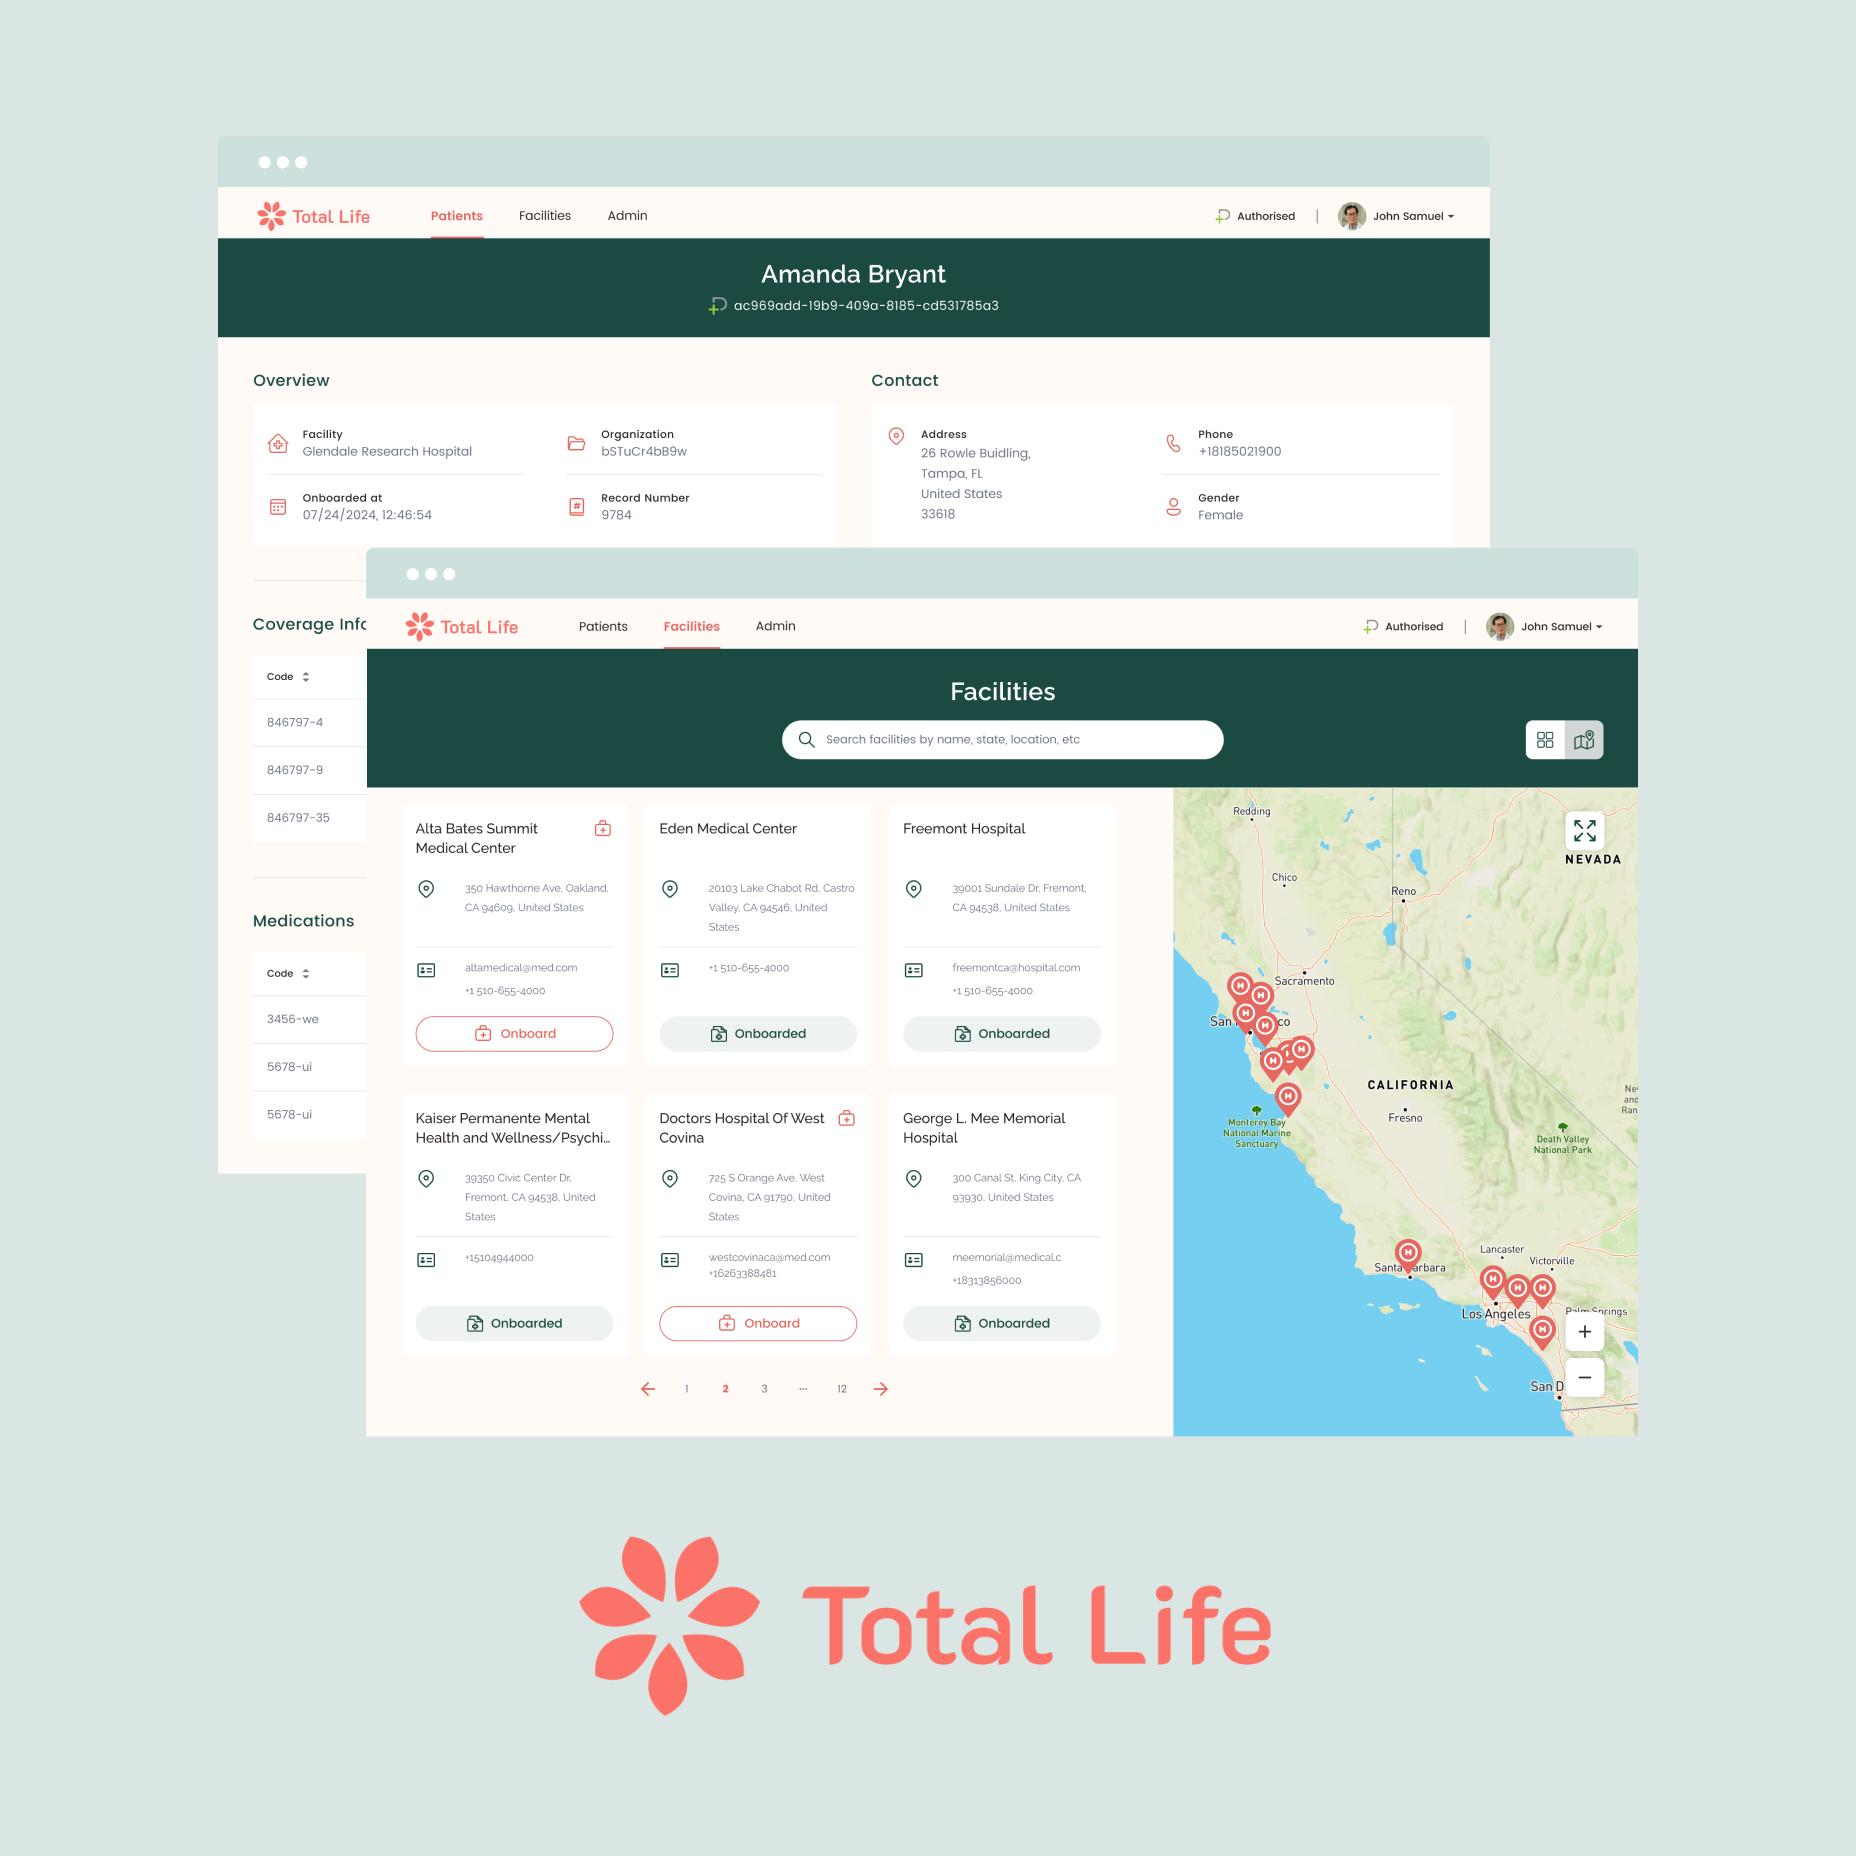 Screenshots of the Total Life web app showing healthcare facilities and patient details.